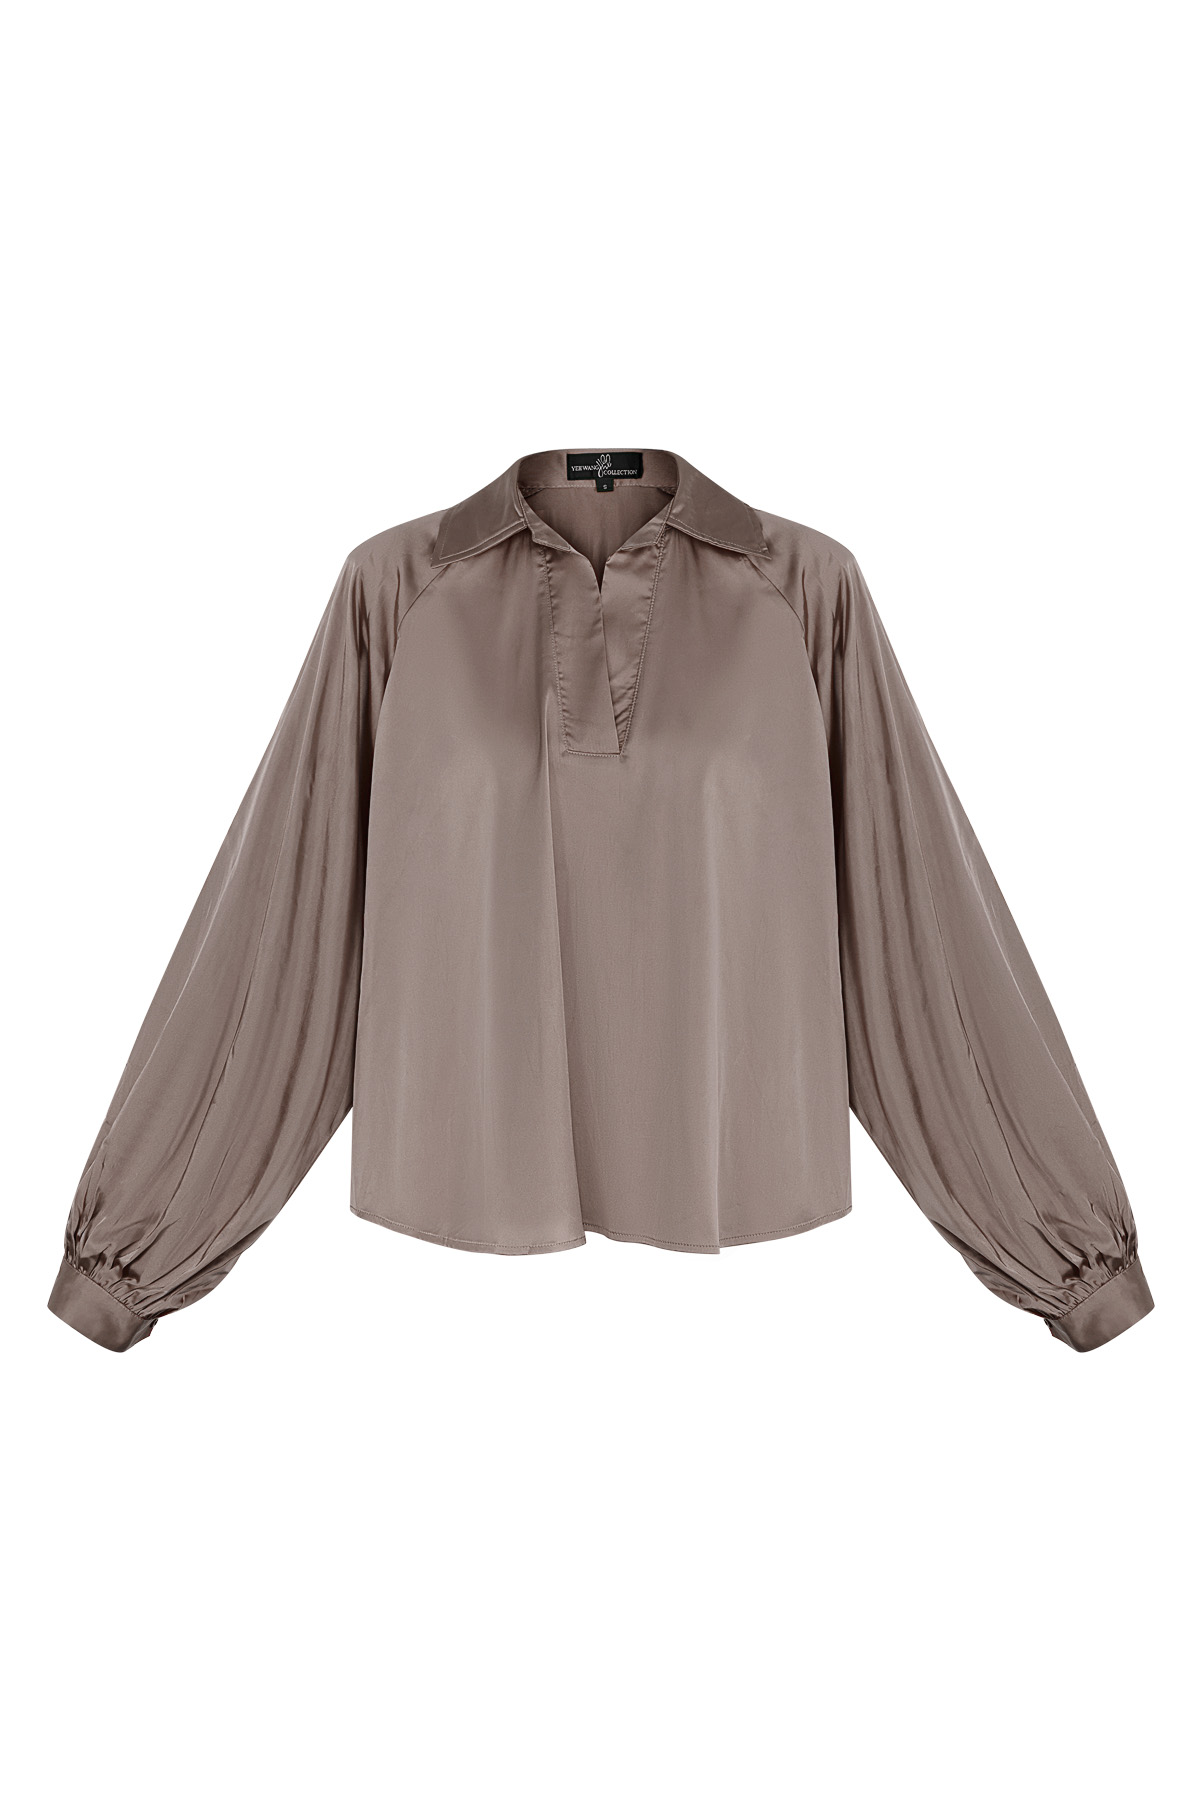 Blouse puffed sleeve brown 